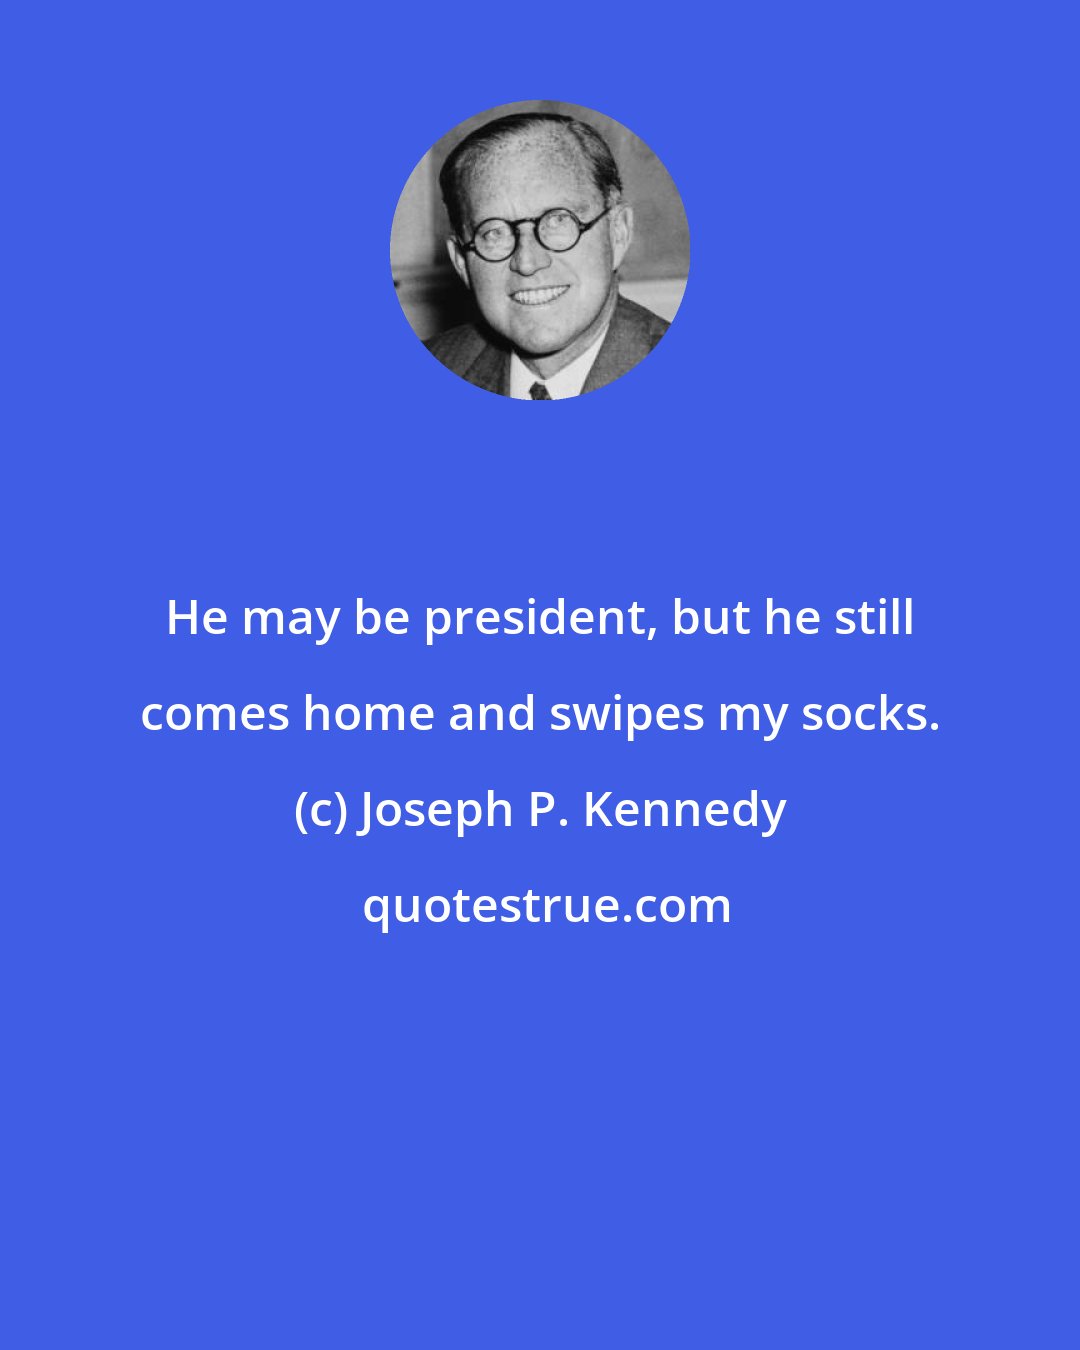 Joseph P. Kennedy: He may be president, but he still comes home and swipes my socks.